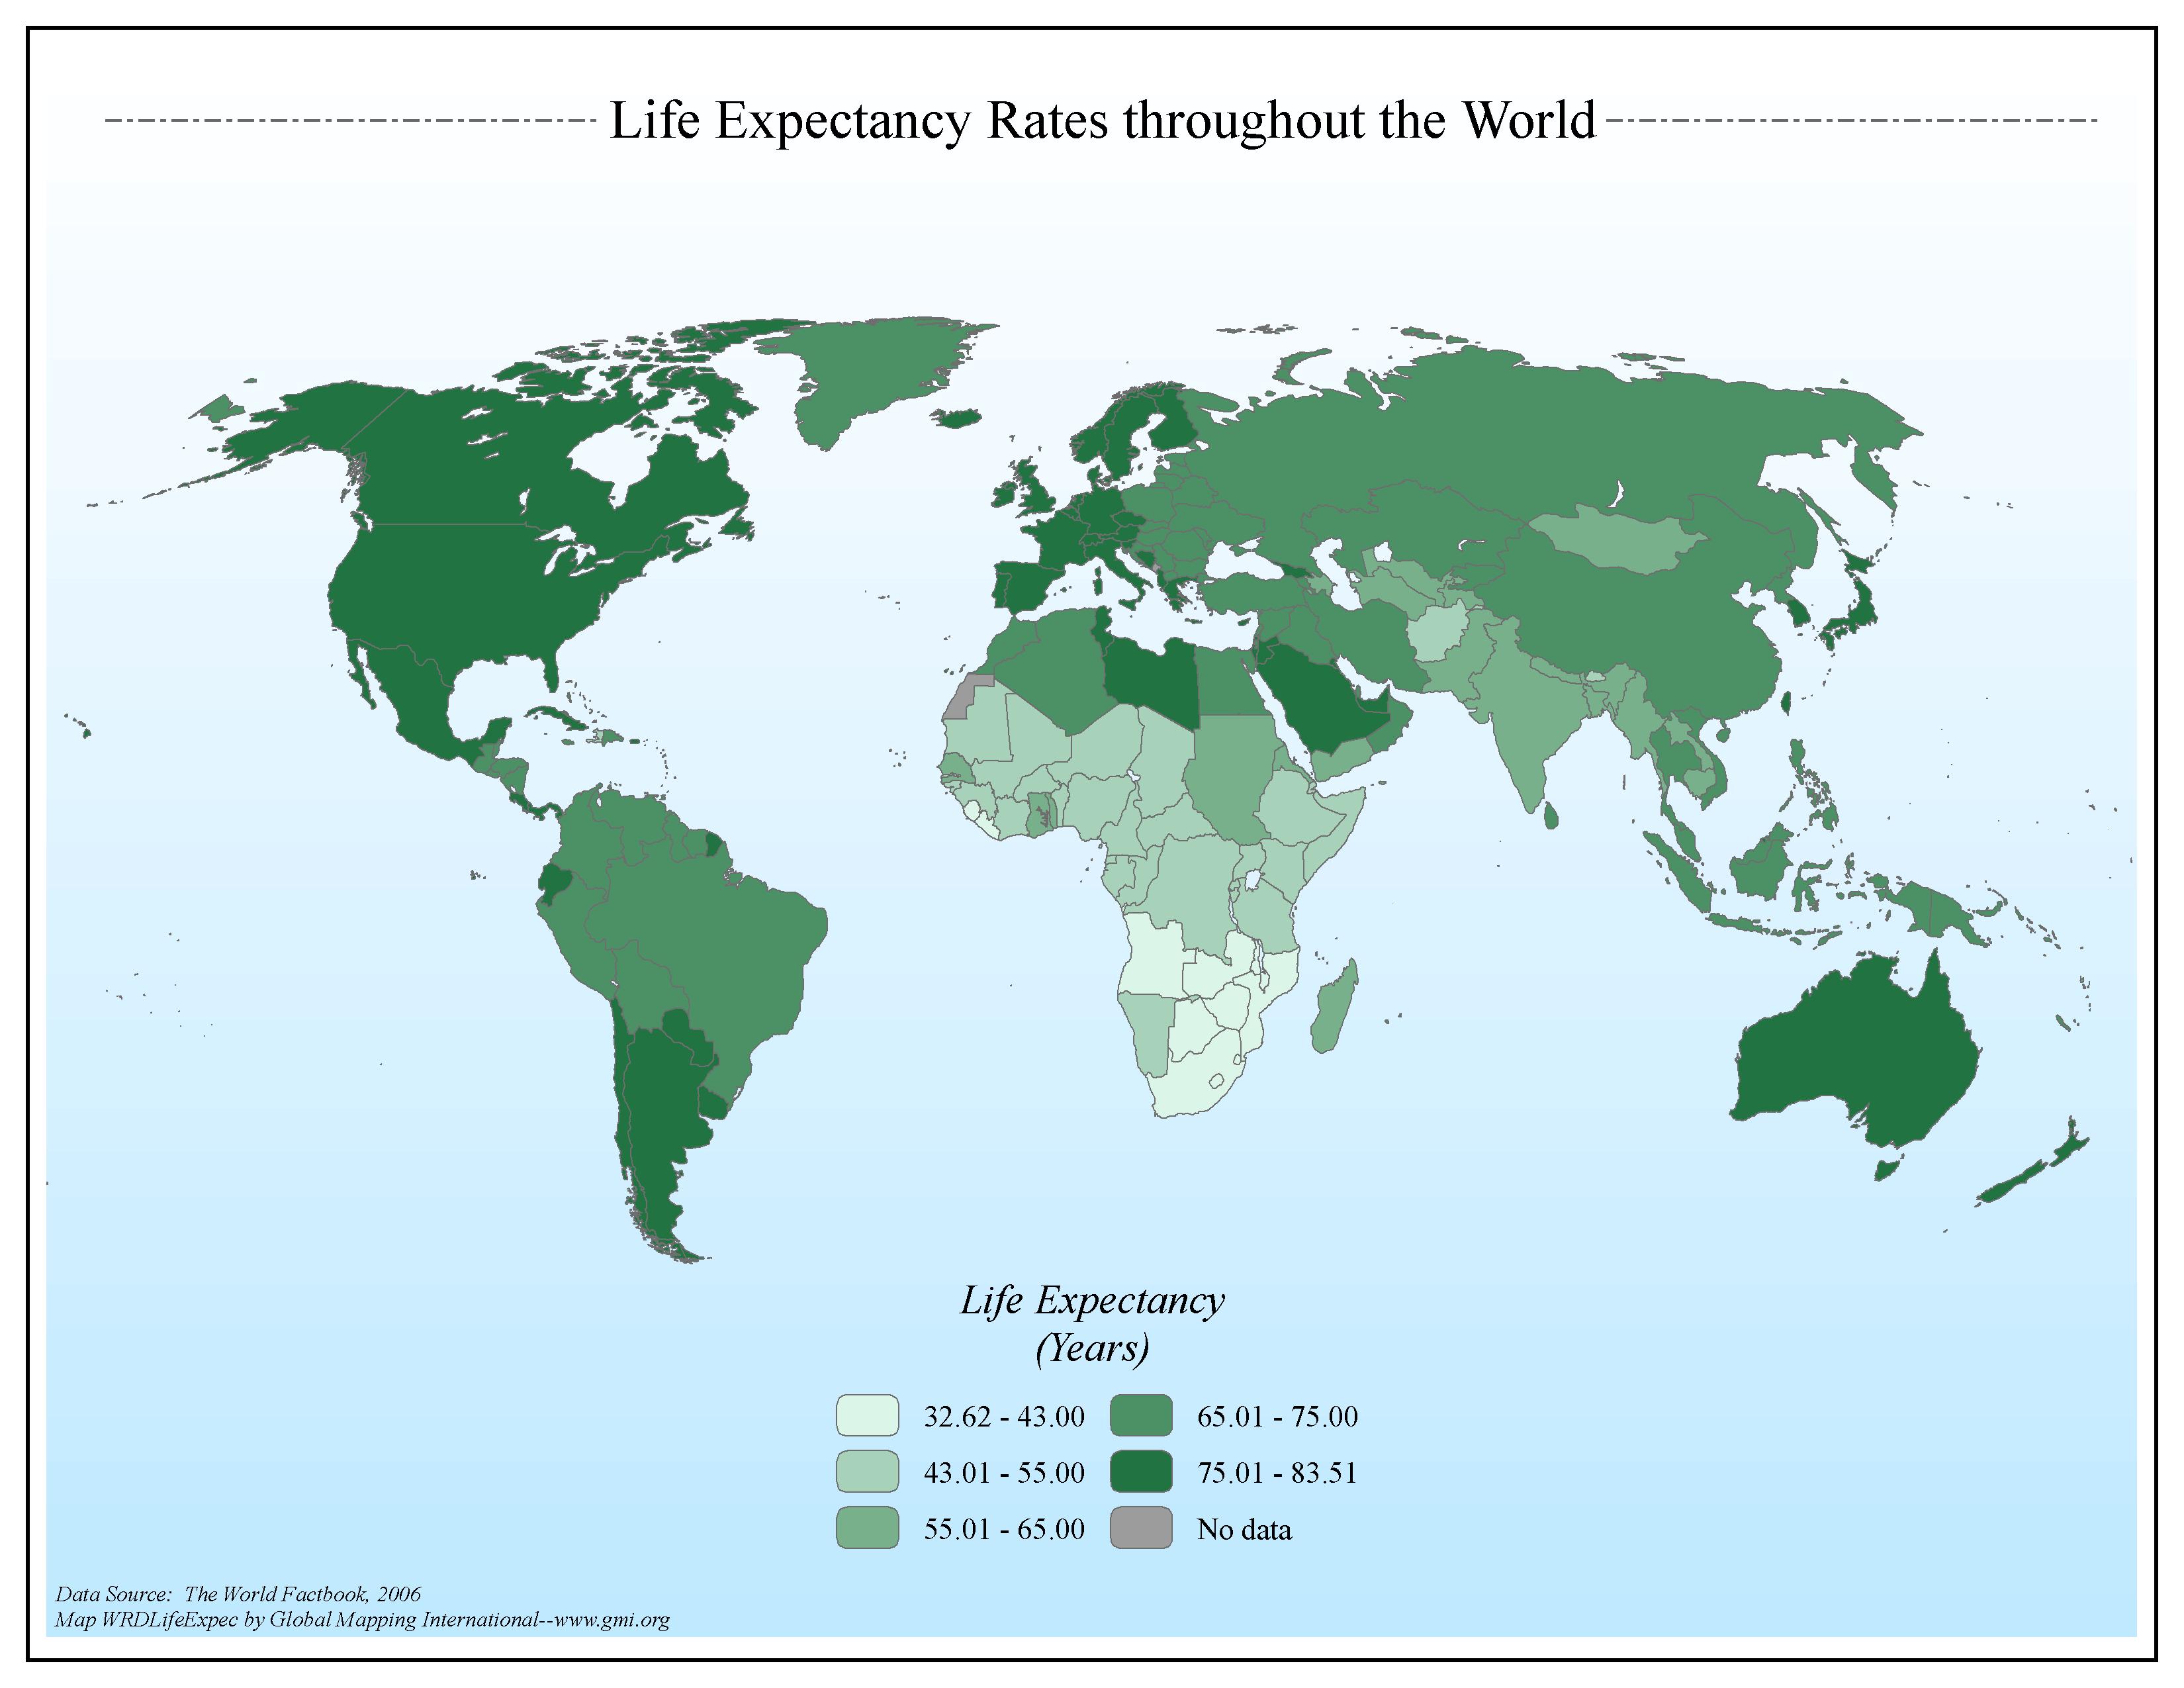 Life Expectancy Rates throughout the World